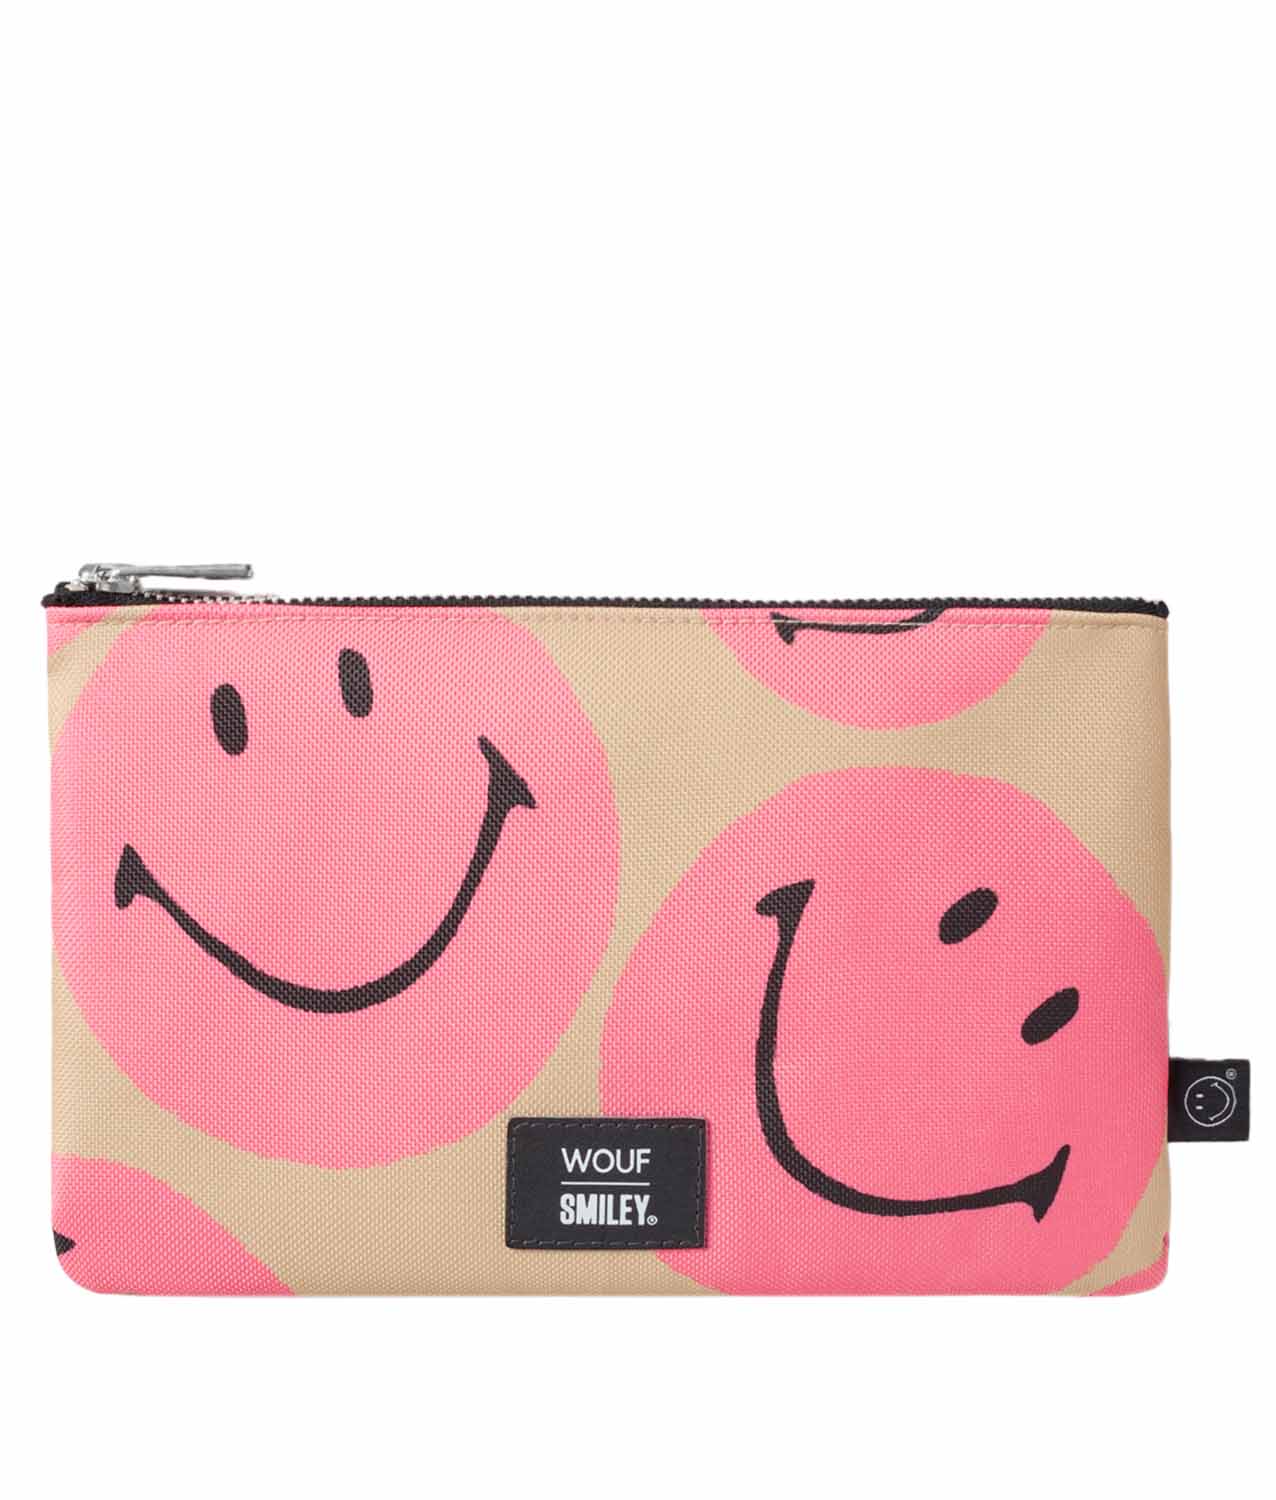 wouf-pink-smiley-large-pouch